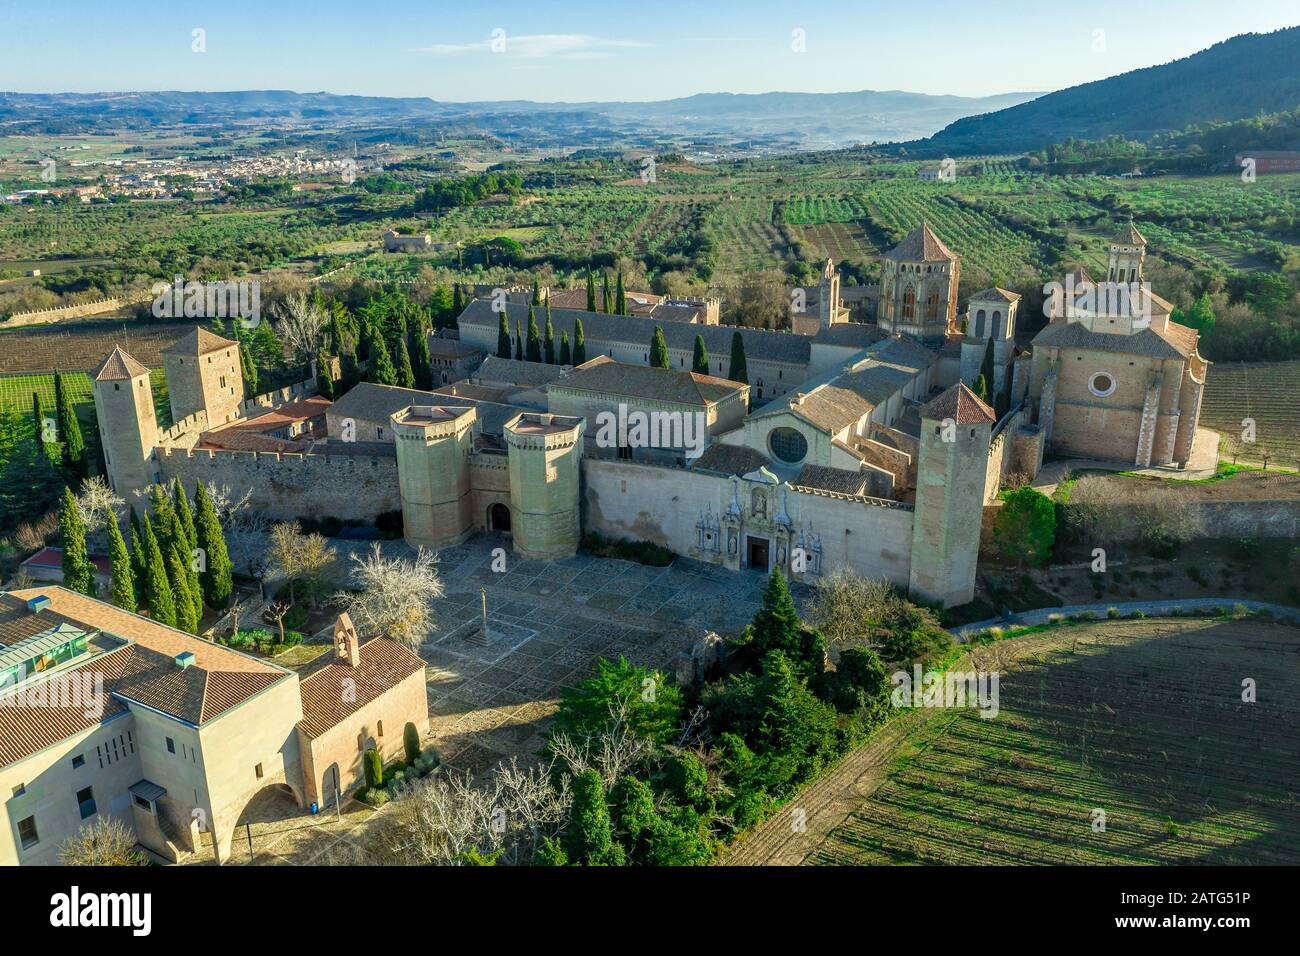 Aerial view of the Royal Abbey of Santa Maria de Poblet a Cistercian fortified monastery, founded in 1151 in Catalunya Spain Stock Photo